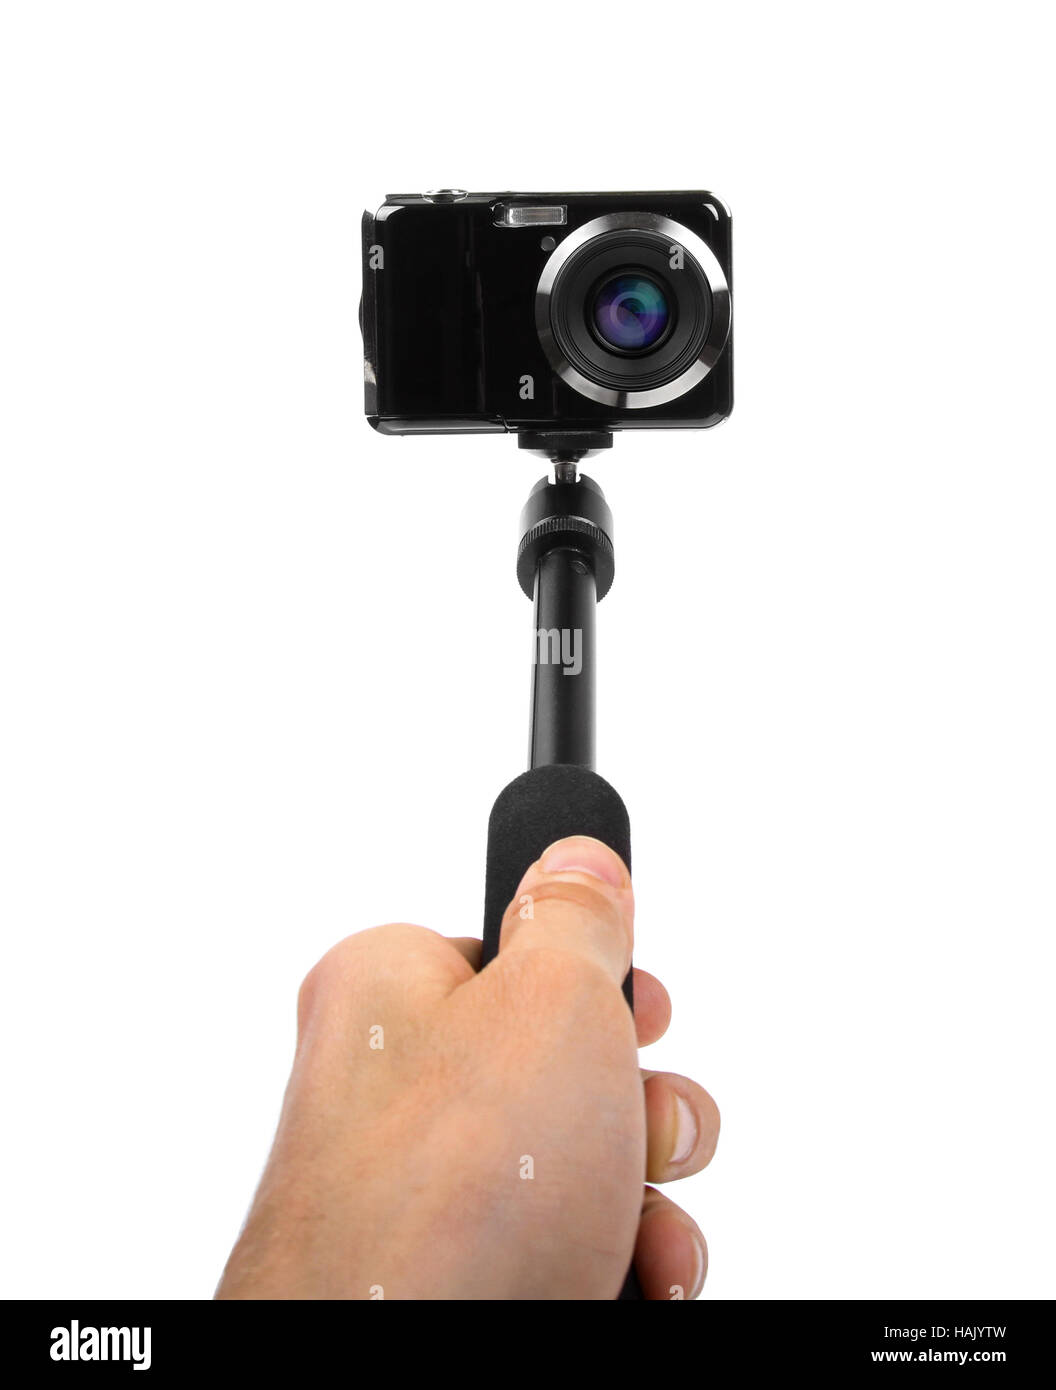 taking selfie - hand hold monopod with photo camera Stock Photo